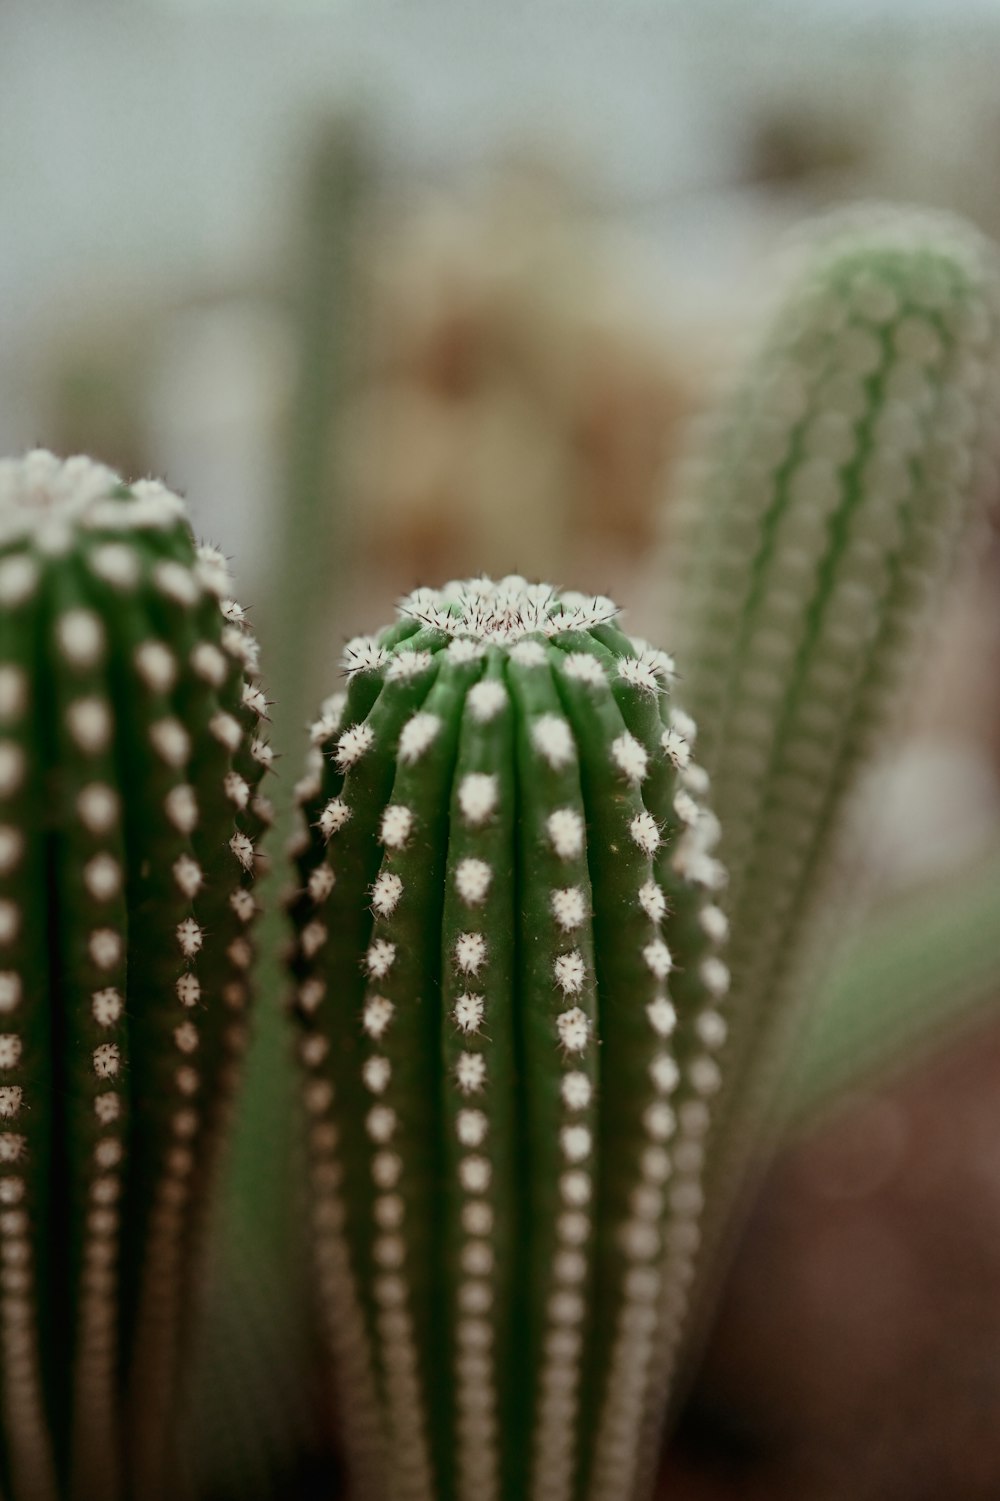 a close up of a green cactus with white dots